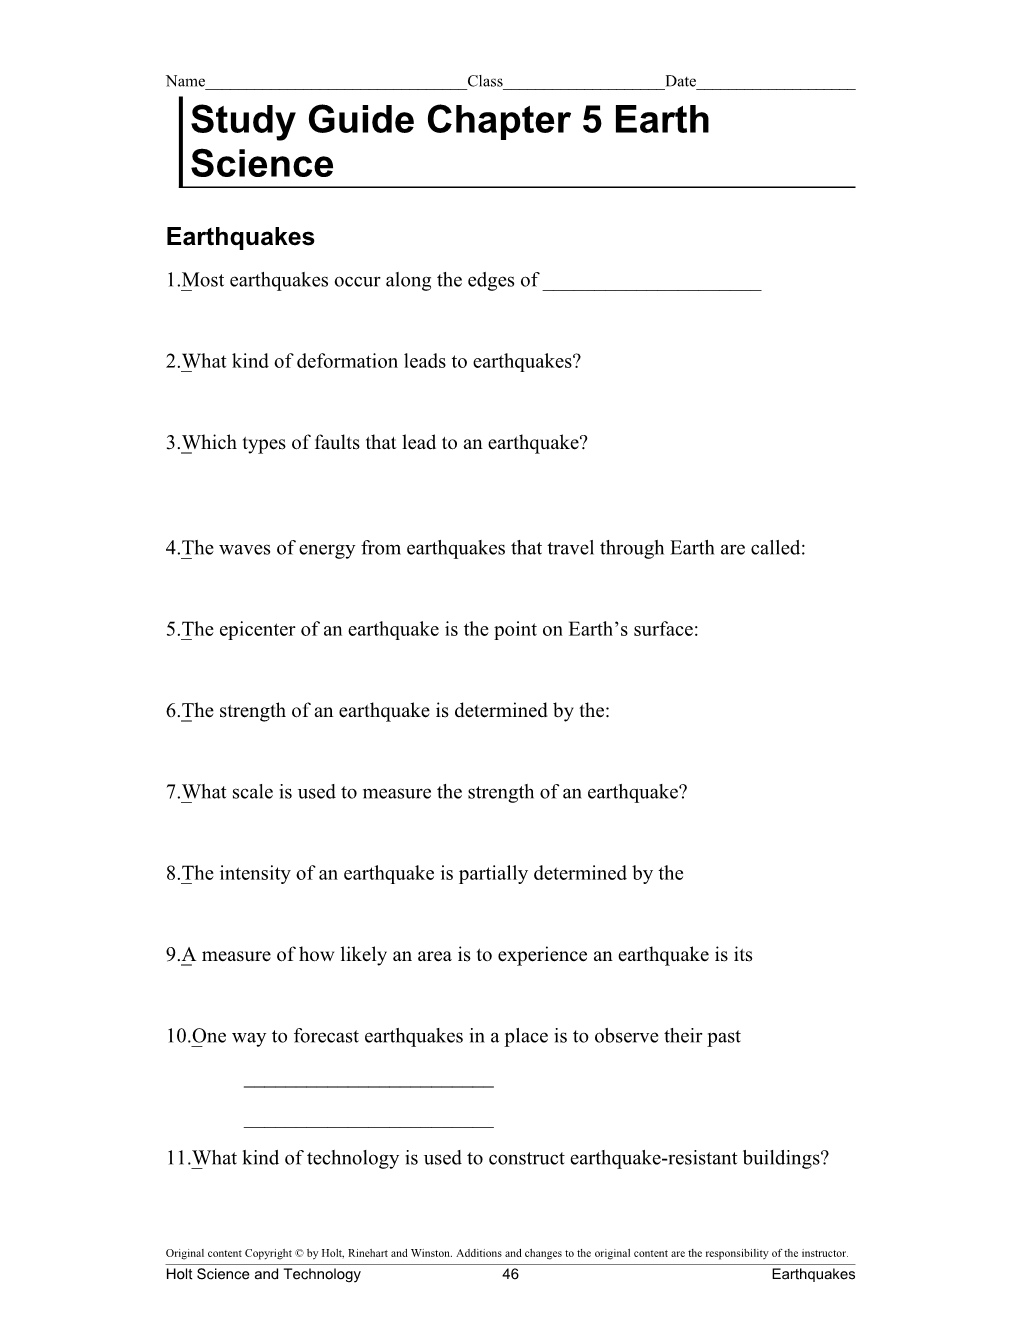 Study Guide Chapter 5 Earth Science